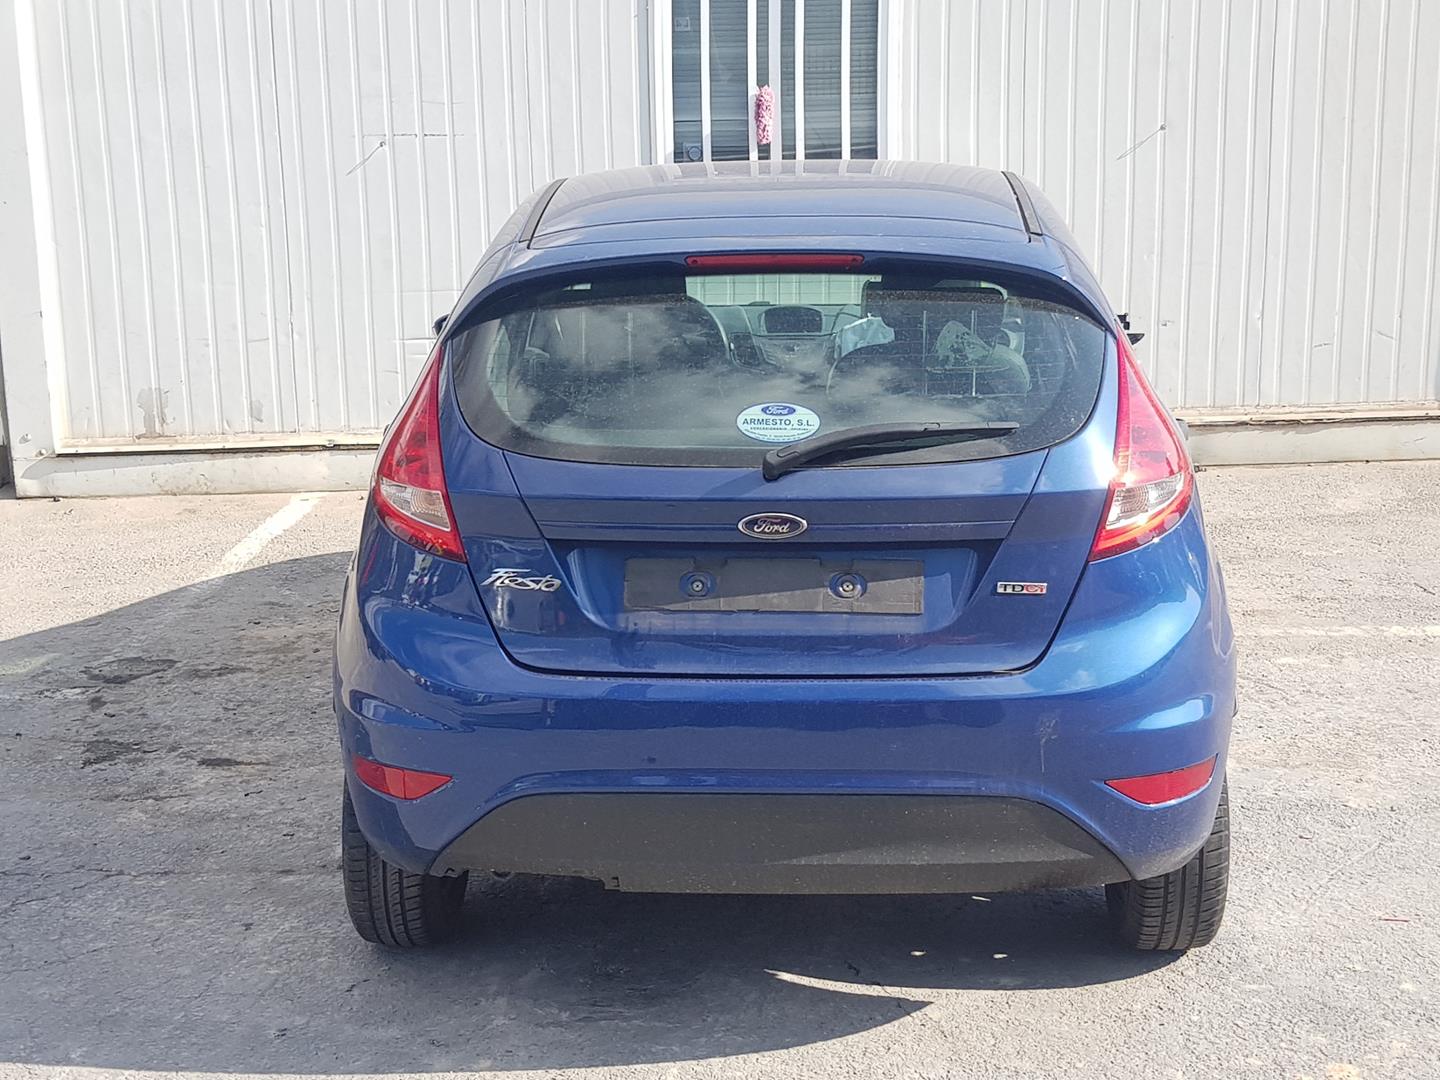 FORD Fiesta 5 generation (2001-2010) ABS blokas 8V512M110AD, 06210213174, ATE 23619904